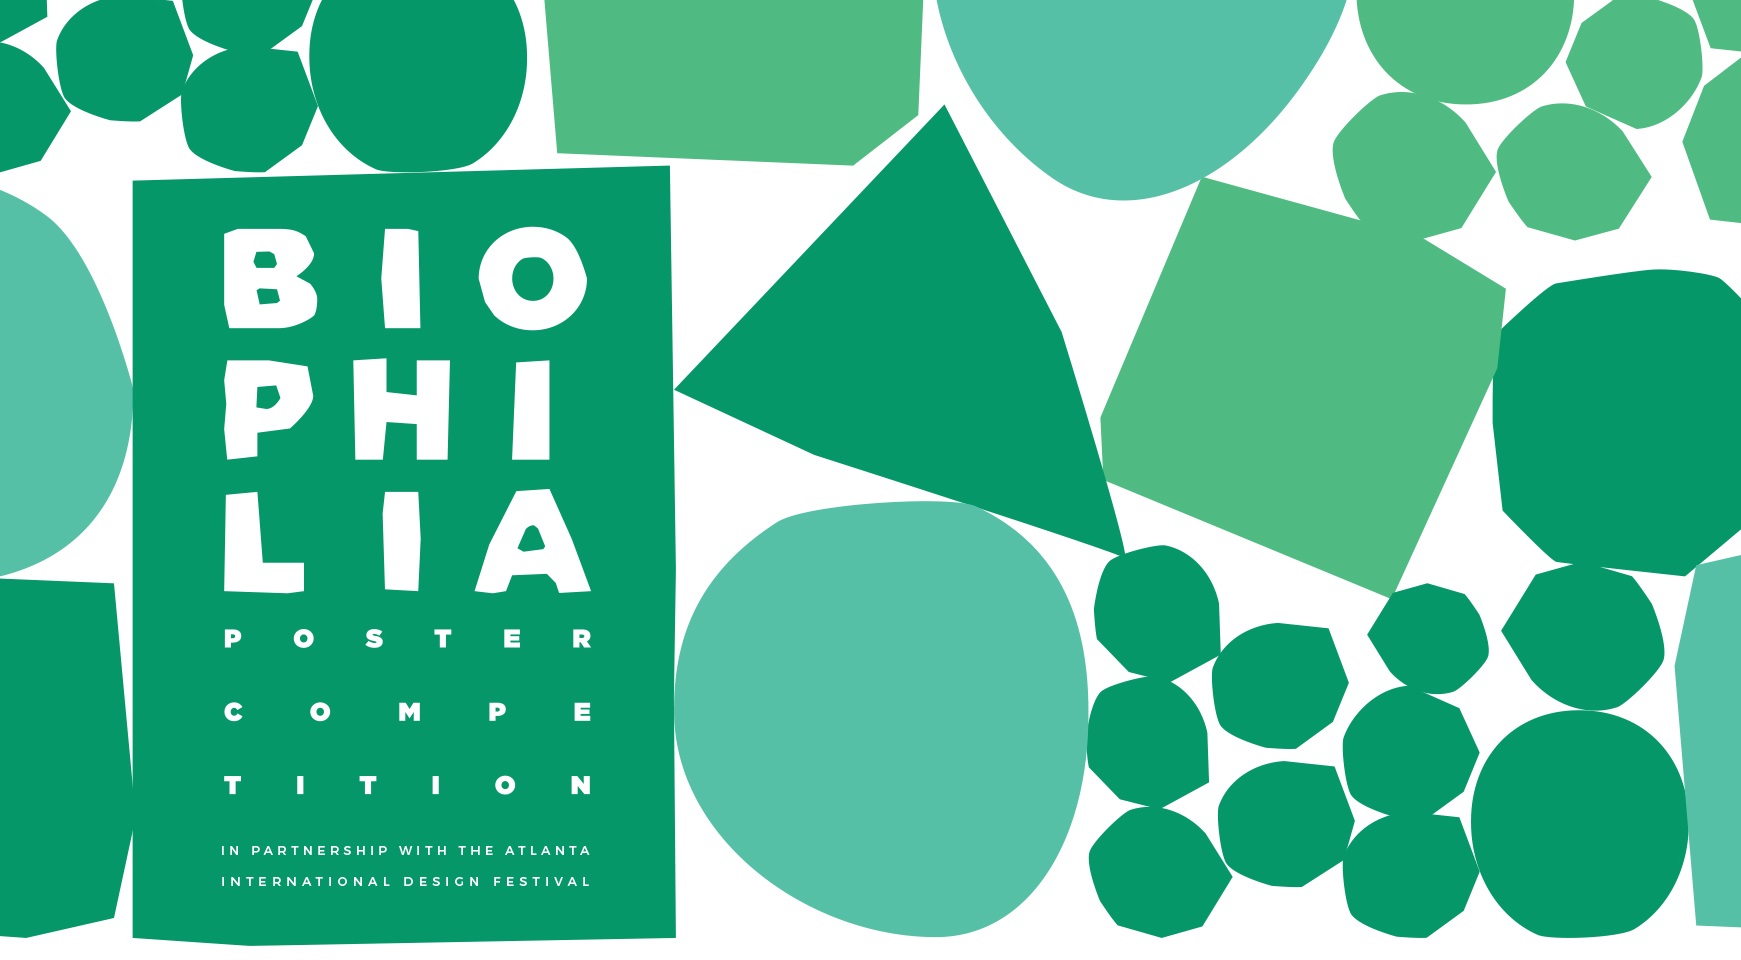 Call for Entries: Biophilia Poster Competition 2020 (Up to $4,500 in prizes)